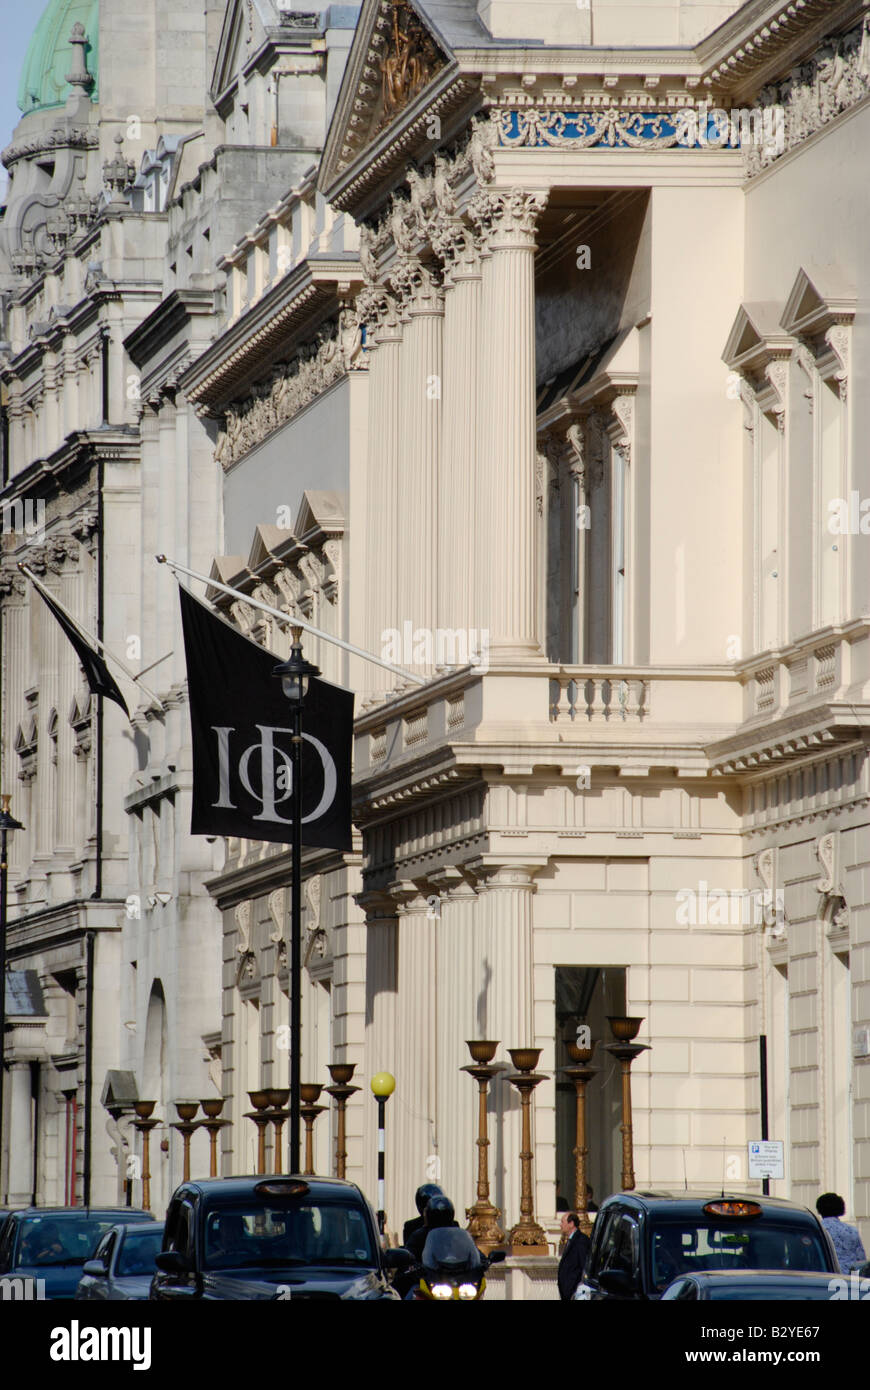 Grand architecture of Pall Mall showing the Institute of Directors London England Stock Photo